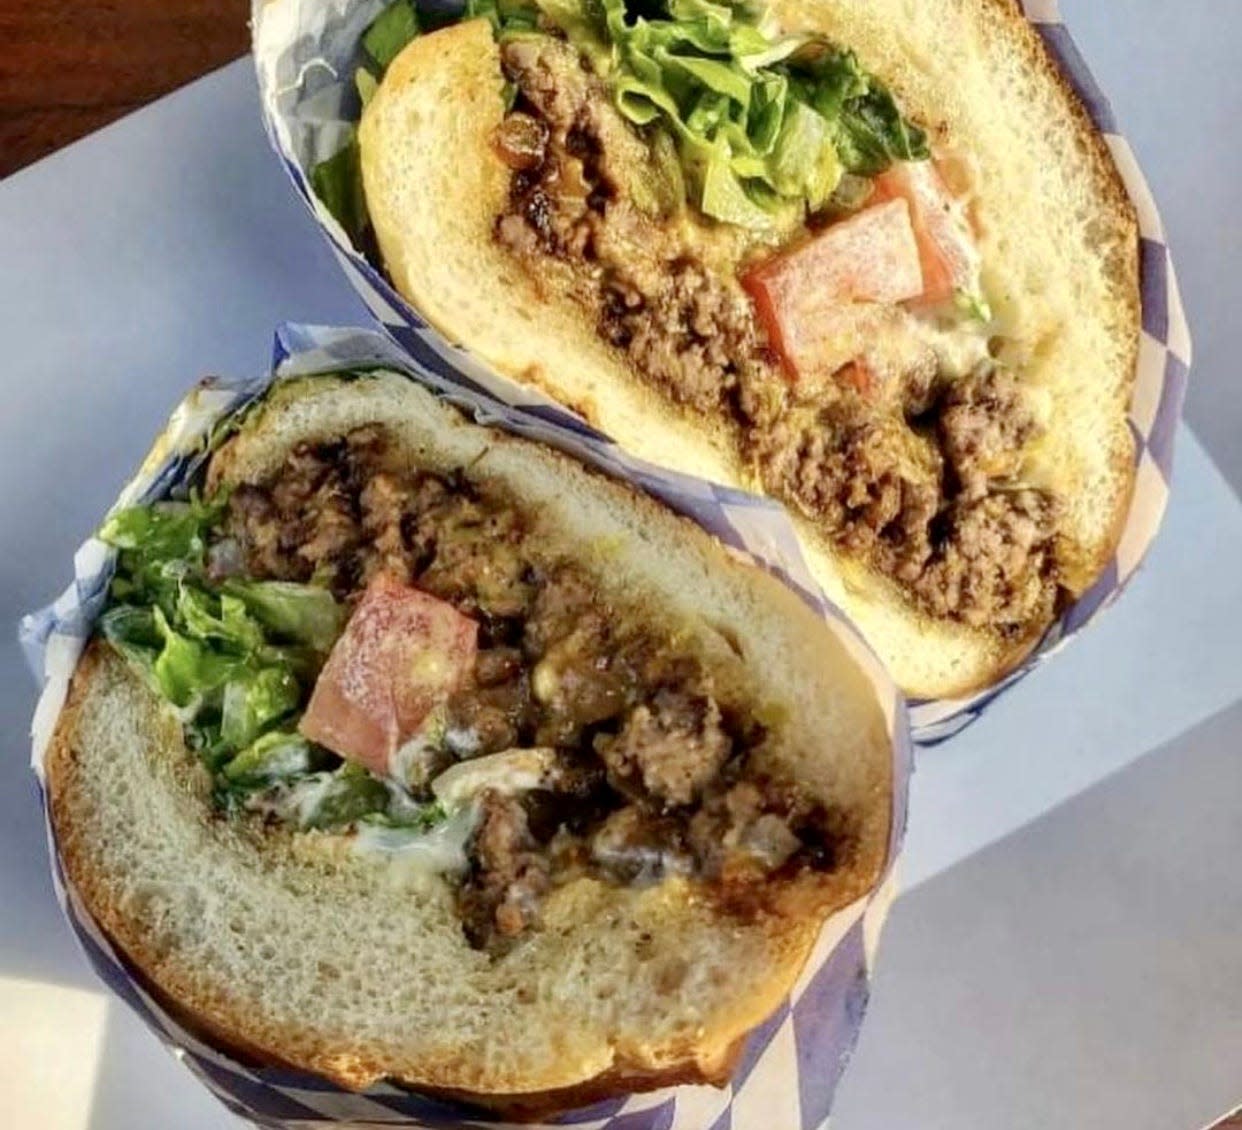 The chopped cheese sandwich at food truck Meat and Co. at Zocalo food park in Walker's Point is new to the menu.